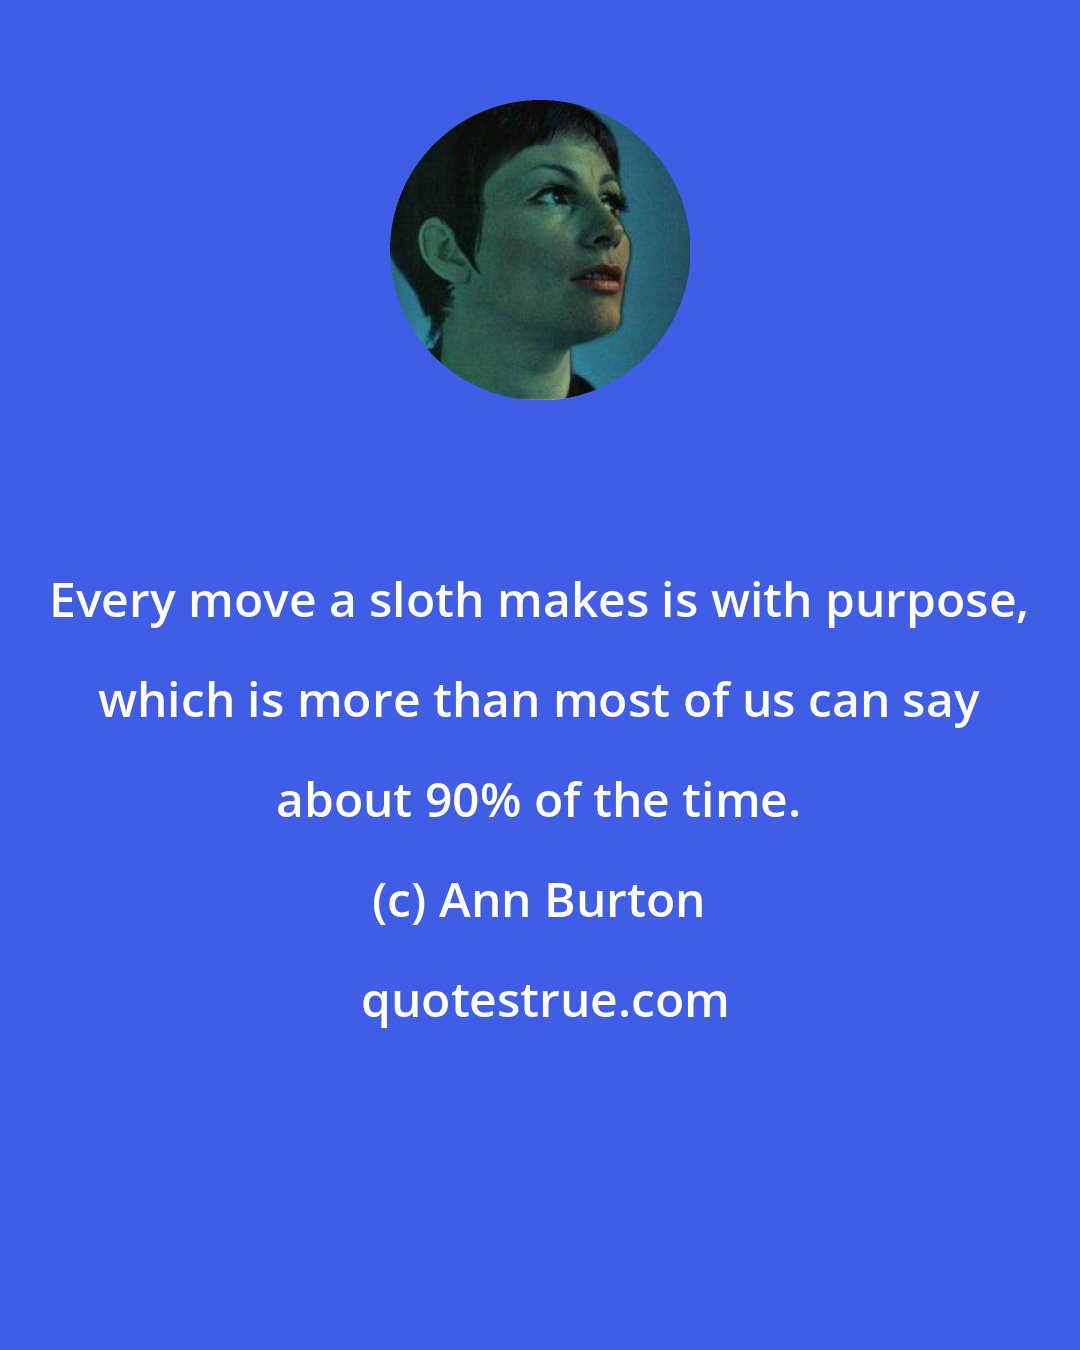 Ann Burton: Every move a sloth makes is with purpose, which is more than most of us can say about 90% of the time.